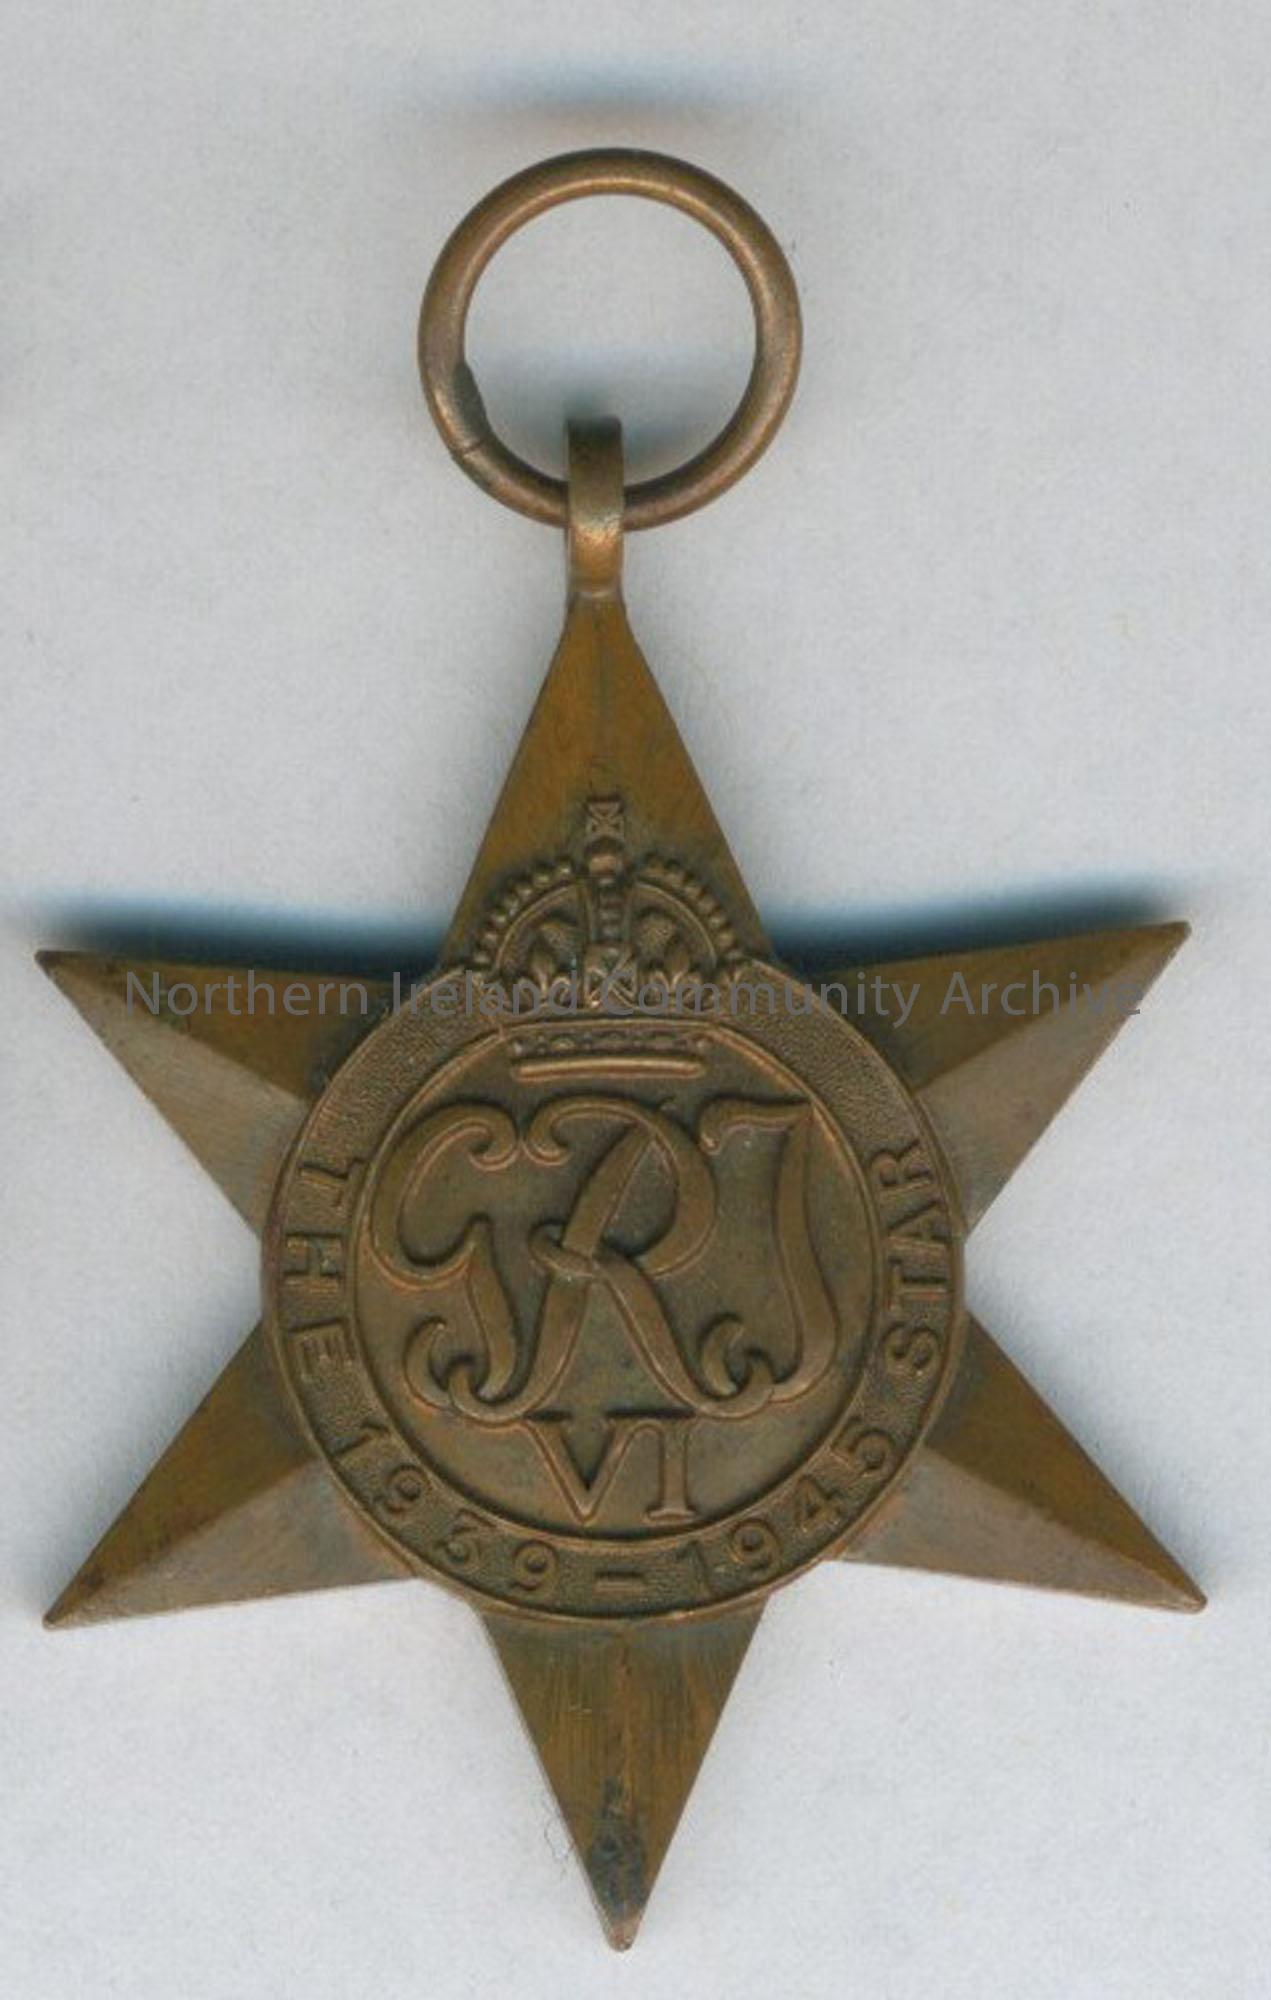 World War Two medal, The 1939-1945 Star awarded to Sgt James Tweed